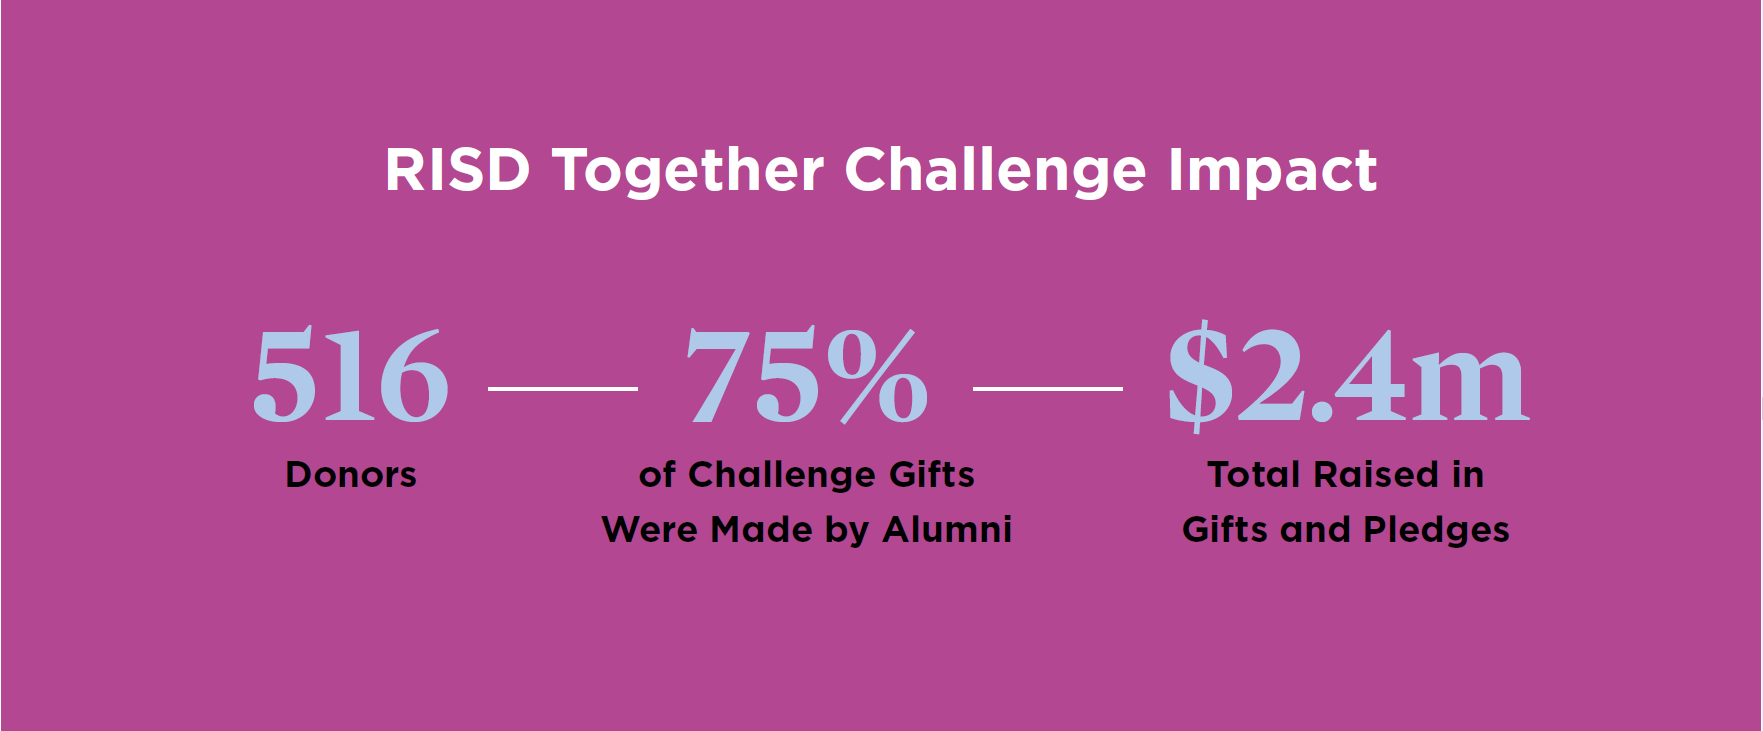 An image with text that says "RISD Together Challenge Impact," "516 donors," "75% of challenge gifts were made by alumni," "$2.4m total raised in gifts and pledges"